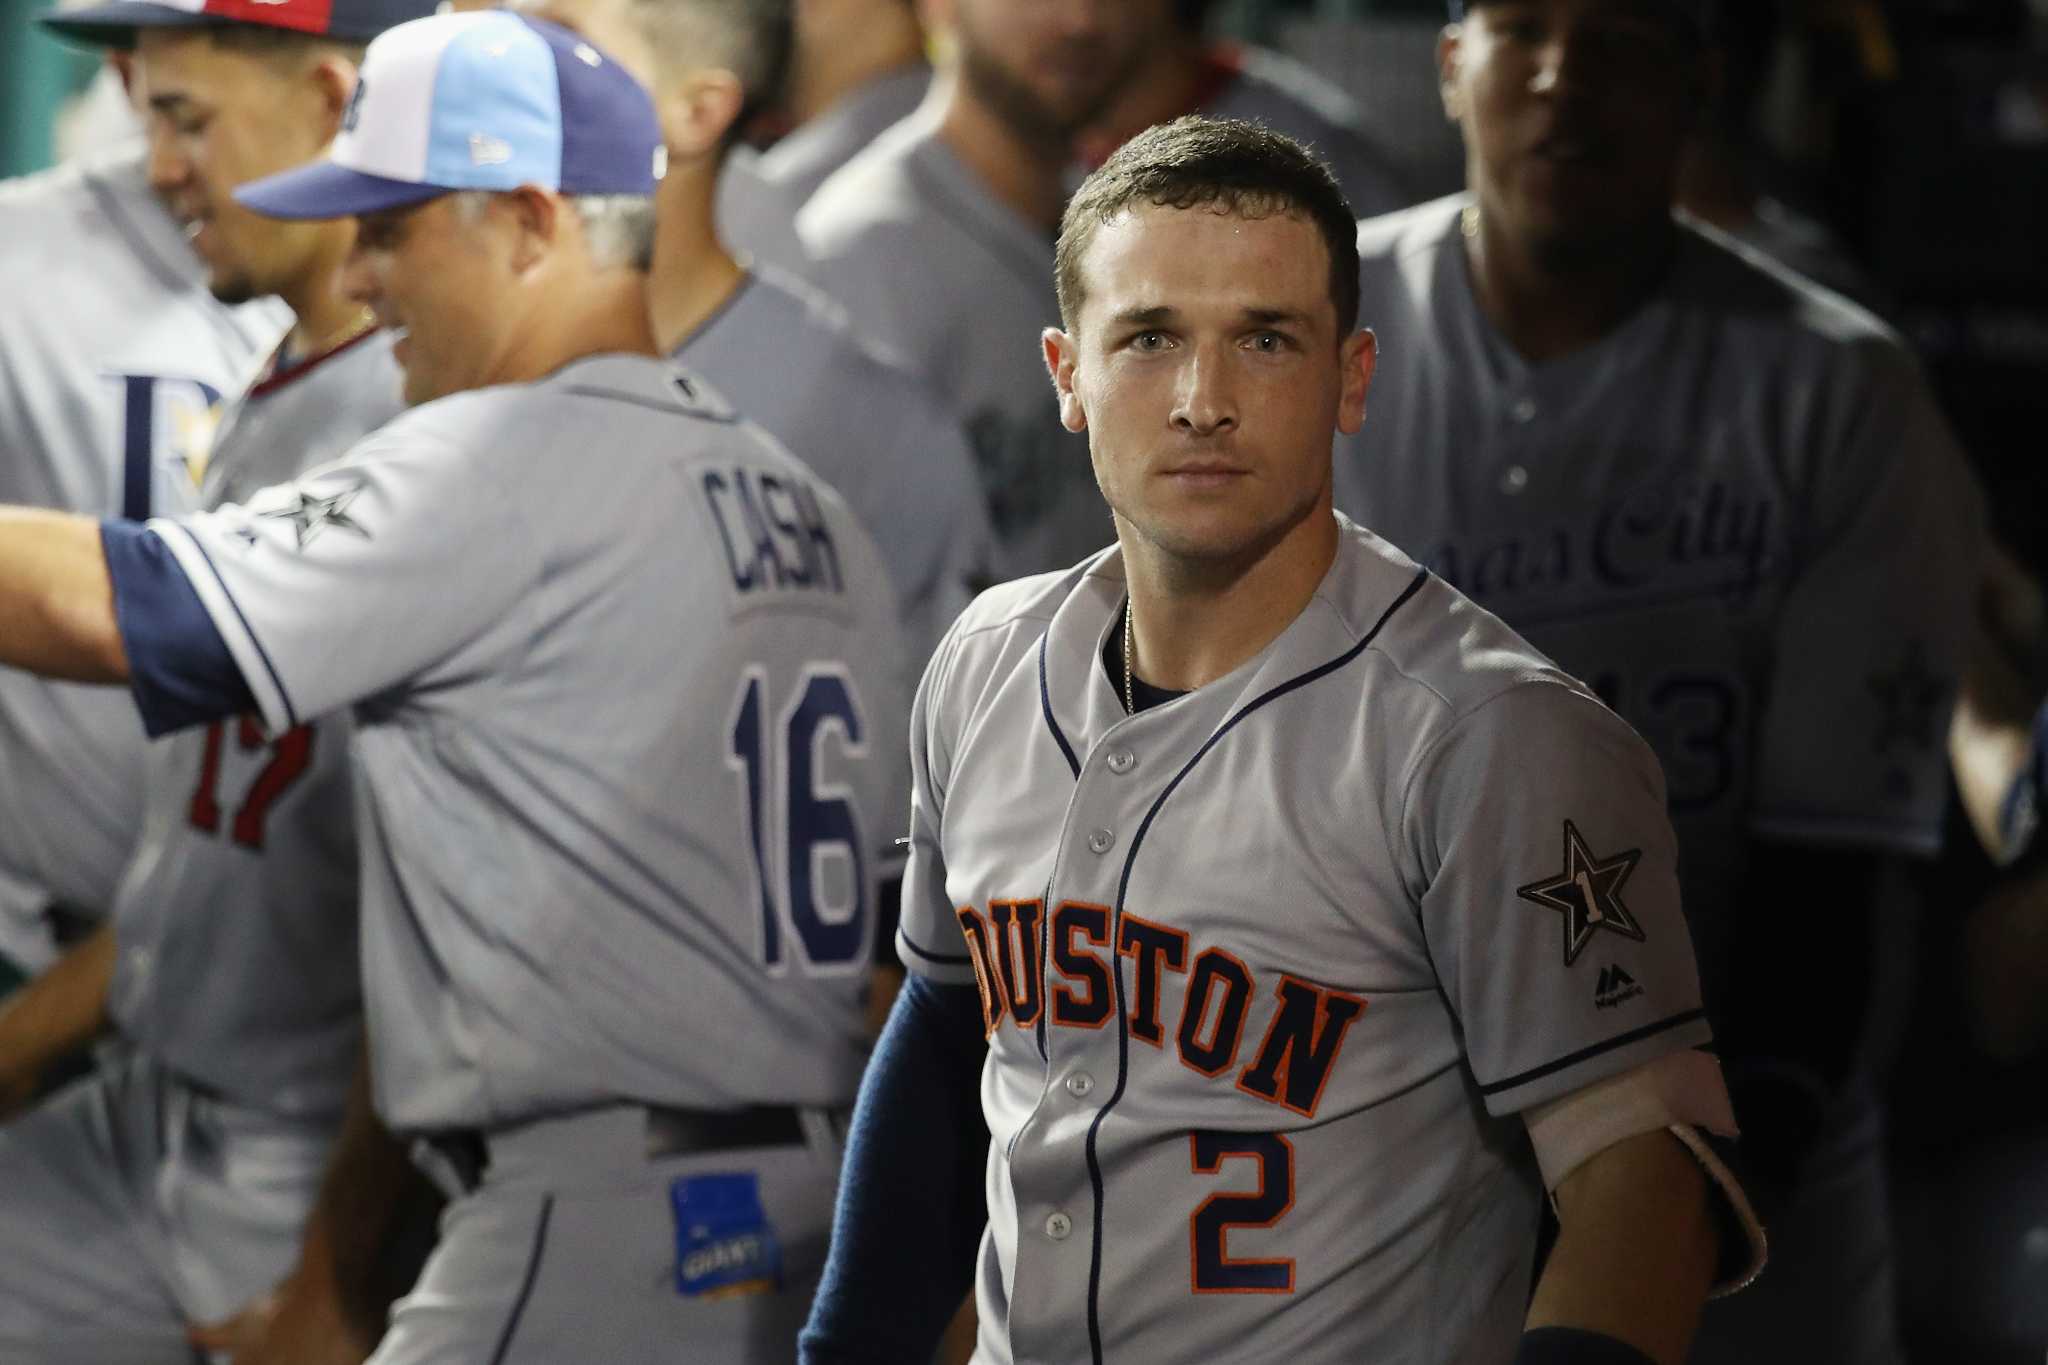 Astros insider: The challenges Alex Bregman faces in his return